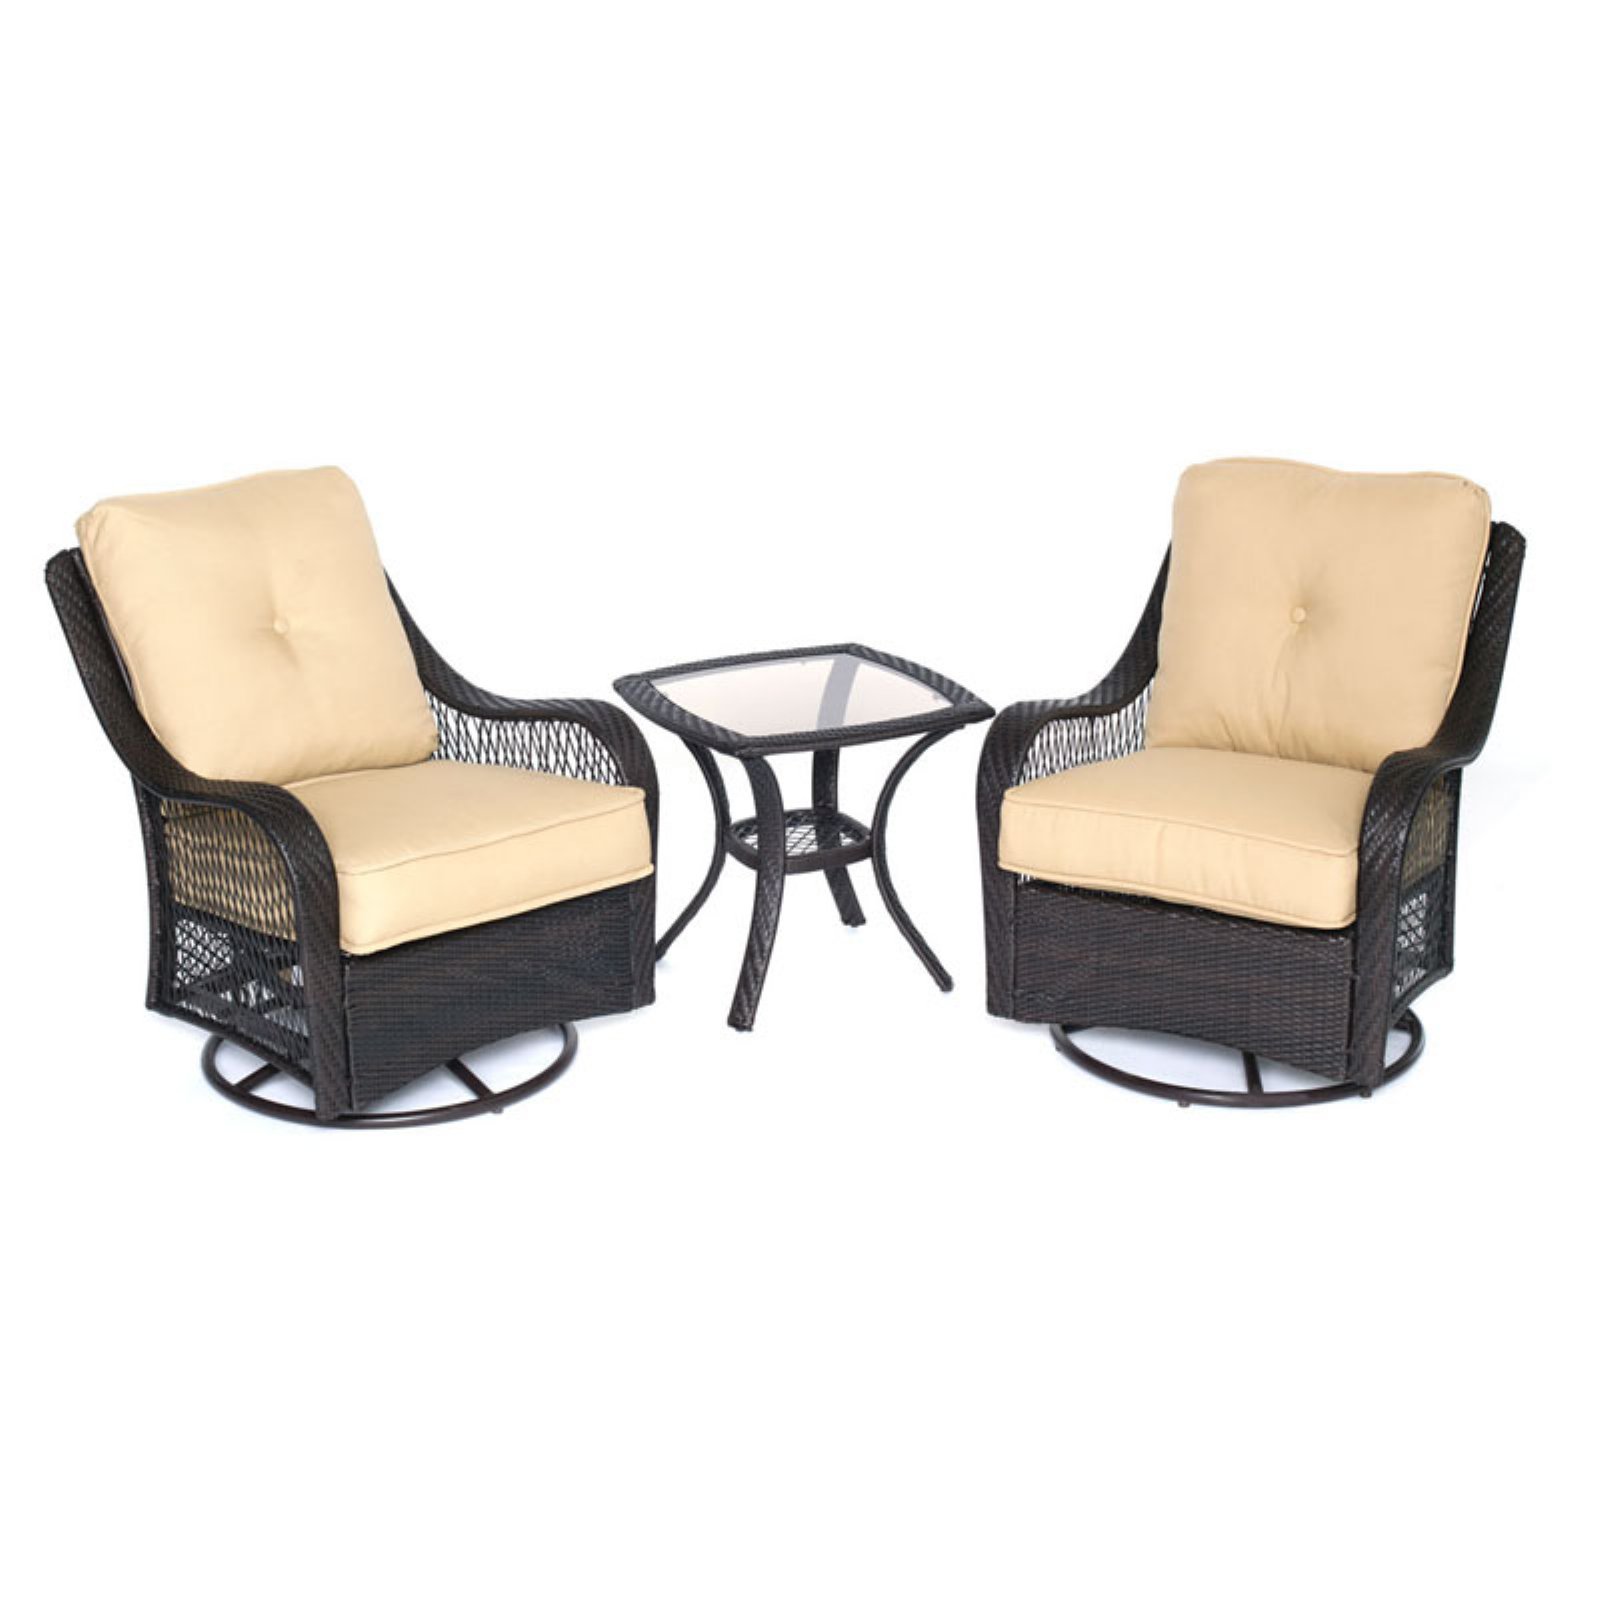 Hanover Orleans 3-Piece Outdoor Swivel Rocking Chat Set - image 3 of 6